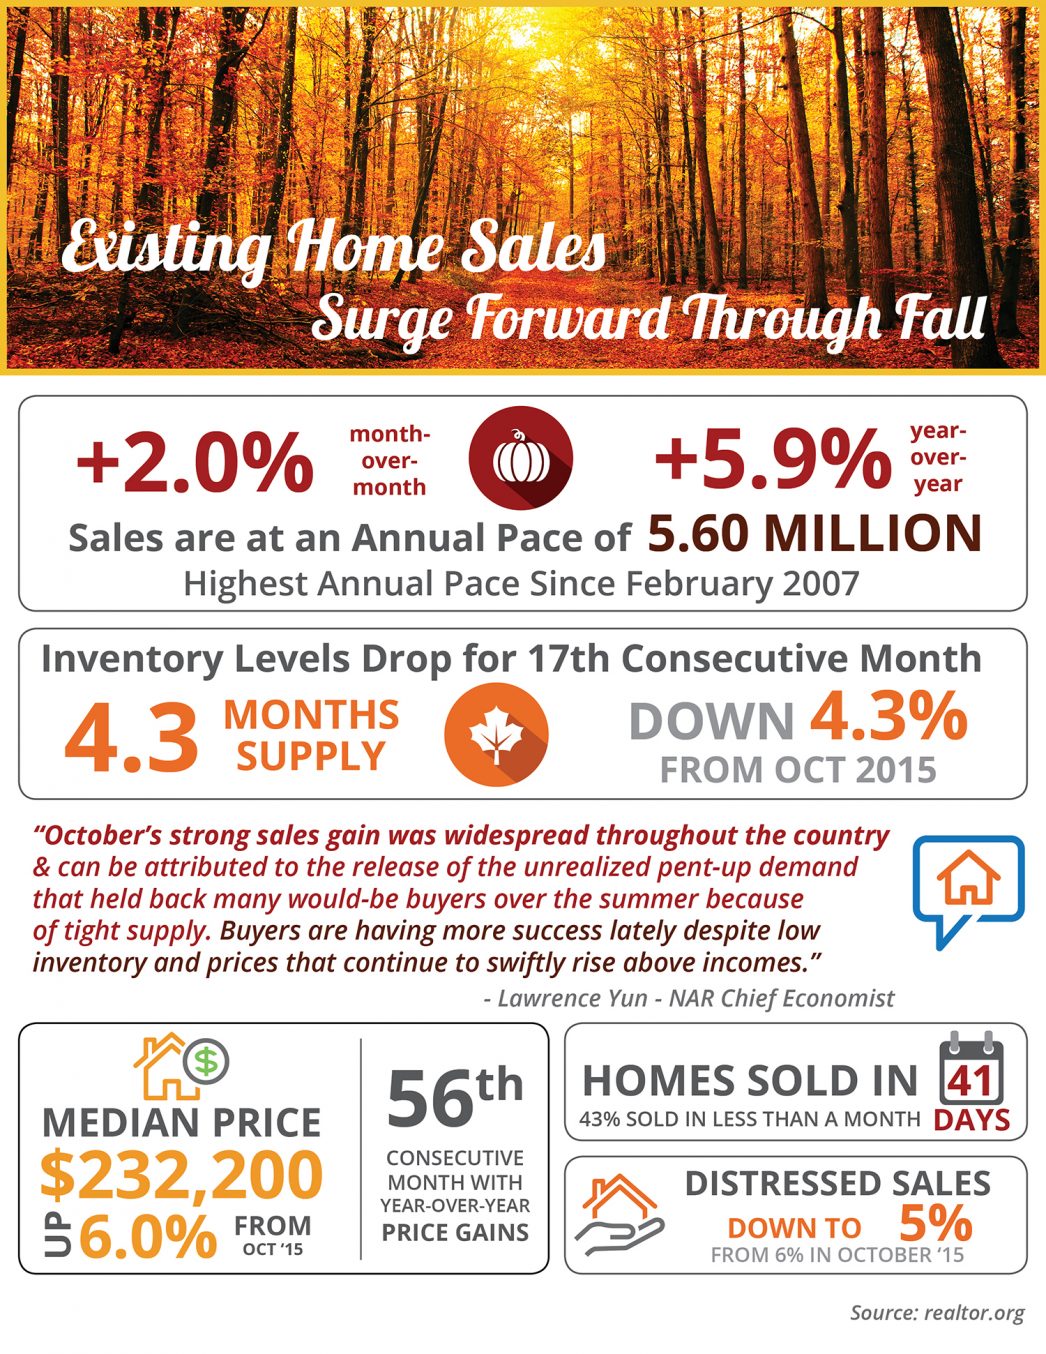 Existing Home Sales Surge Forward Through Fall [INFOGRAPHIC] | MyKCM